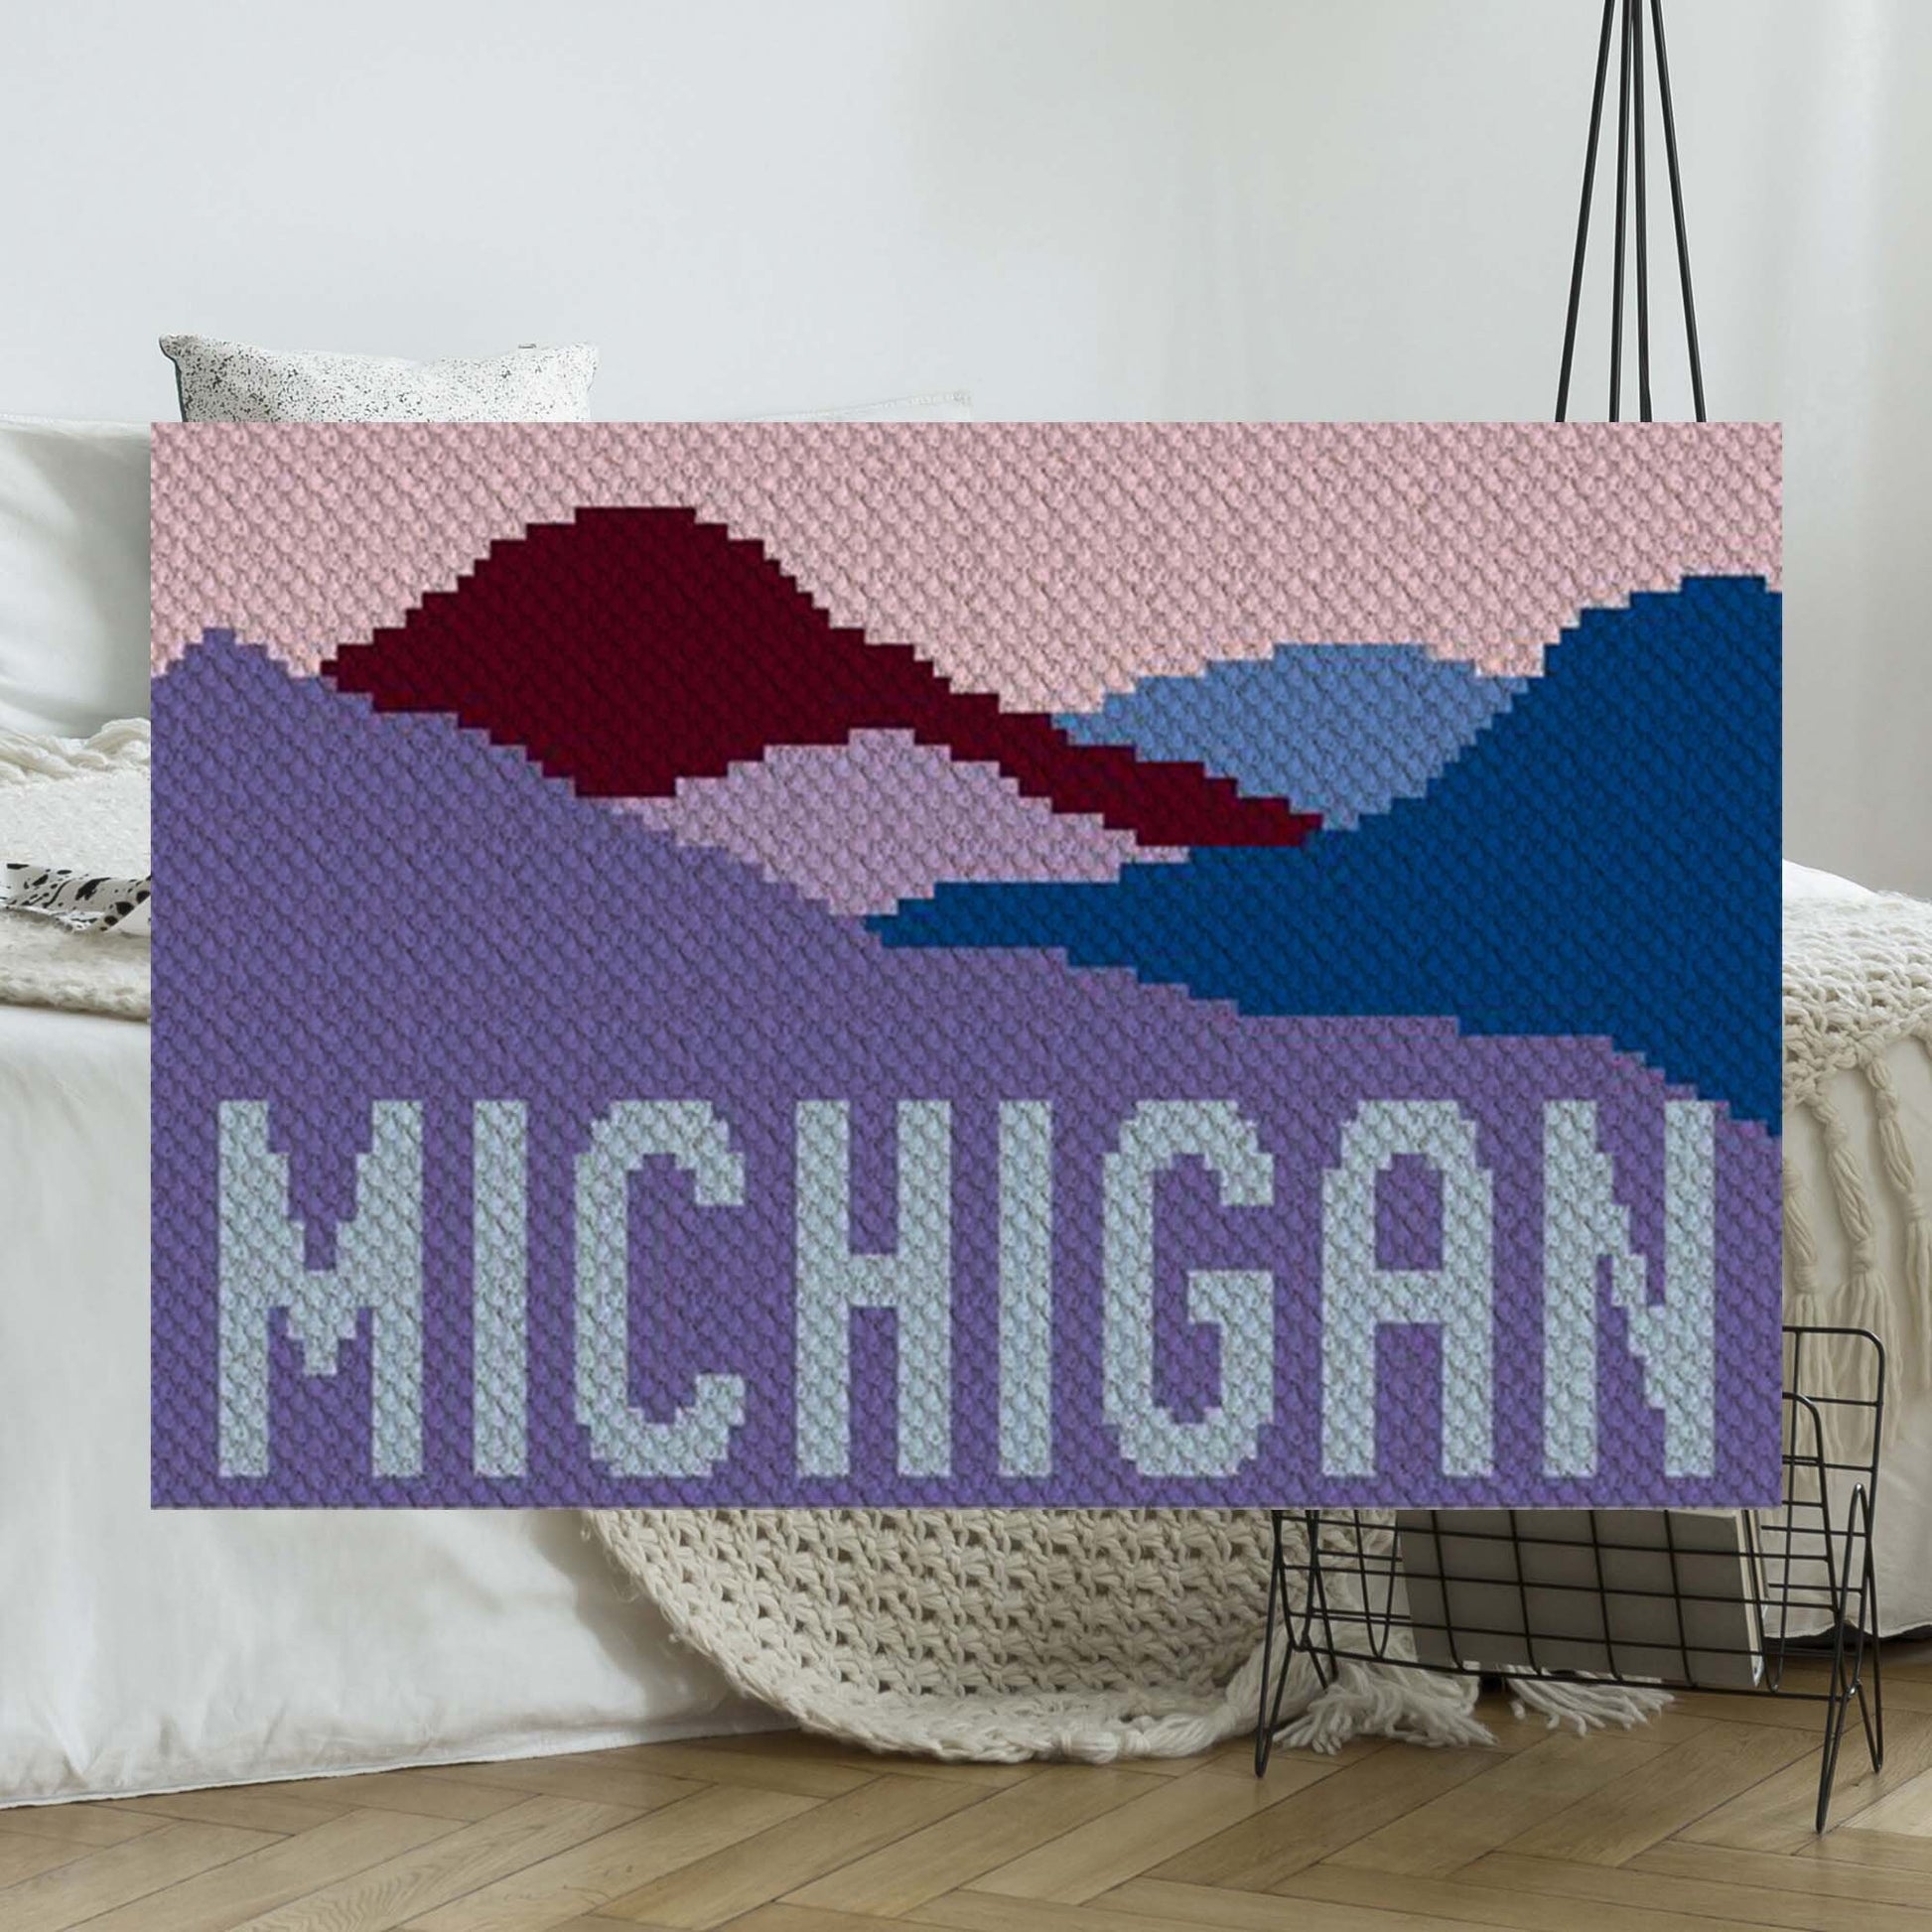 Go to the Mountains of Michigan COUNTED Crochet Pattern